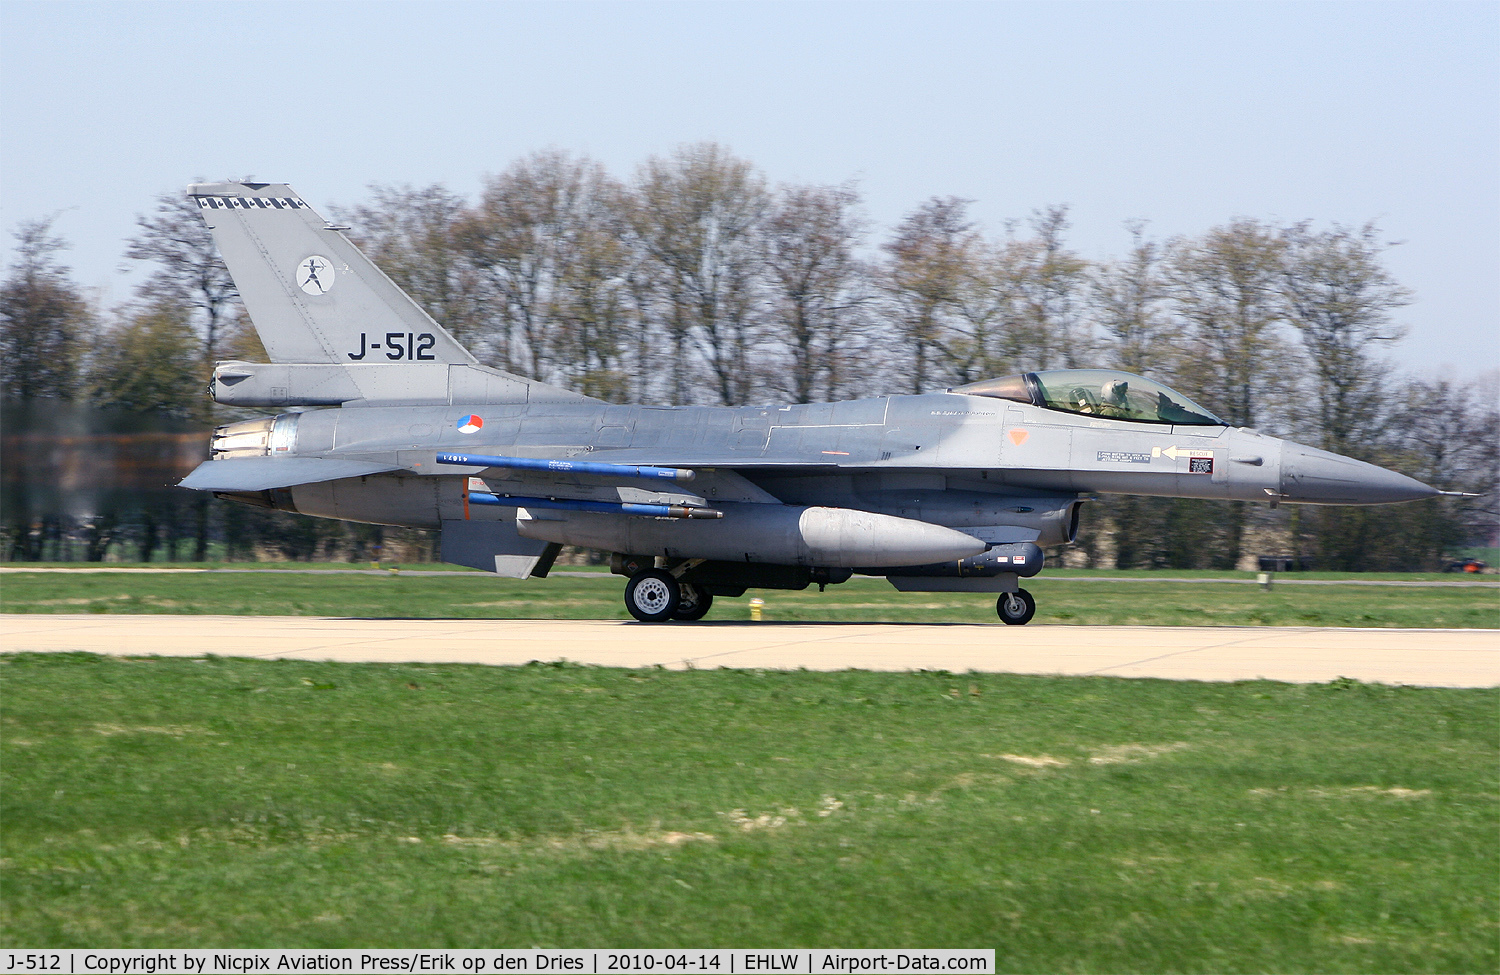 J-512, Fokker F-16AM Fighting Falcon C/N 6D-151, Breaks off, BOOSTER!! F-16AM J-512 in the take off at Leeuwarden AB, The Netherlands during Frisian Flag 2010